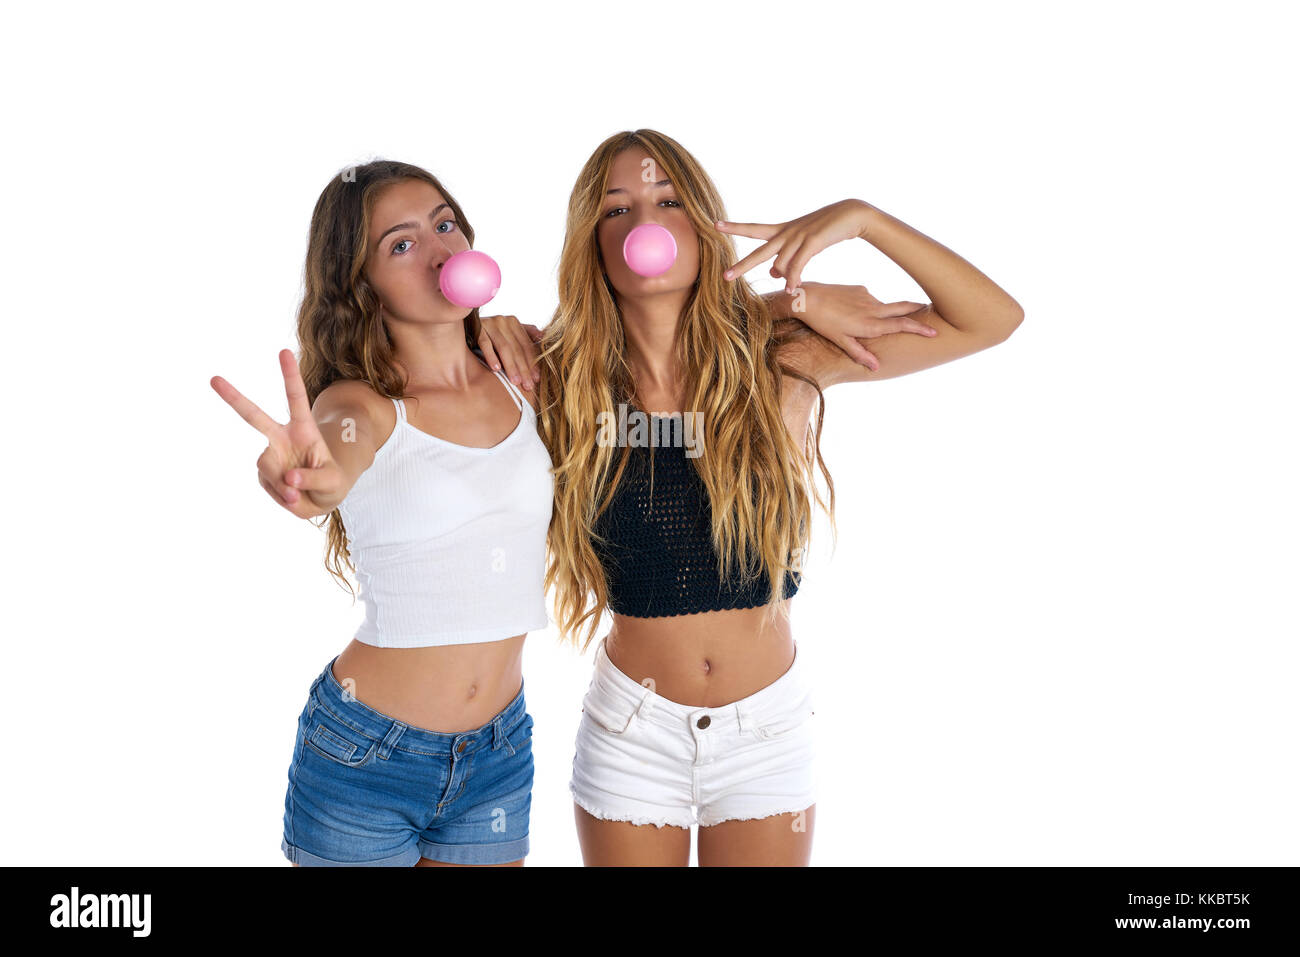 Best friends teen girls with bubble gum on white background Stock Photo